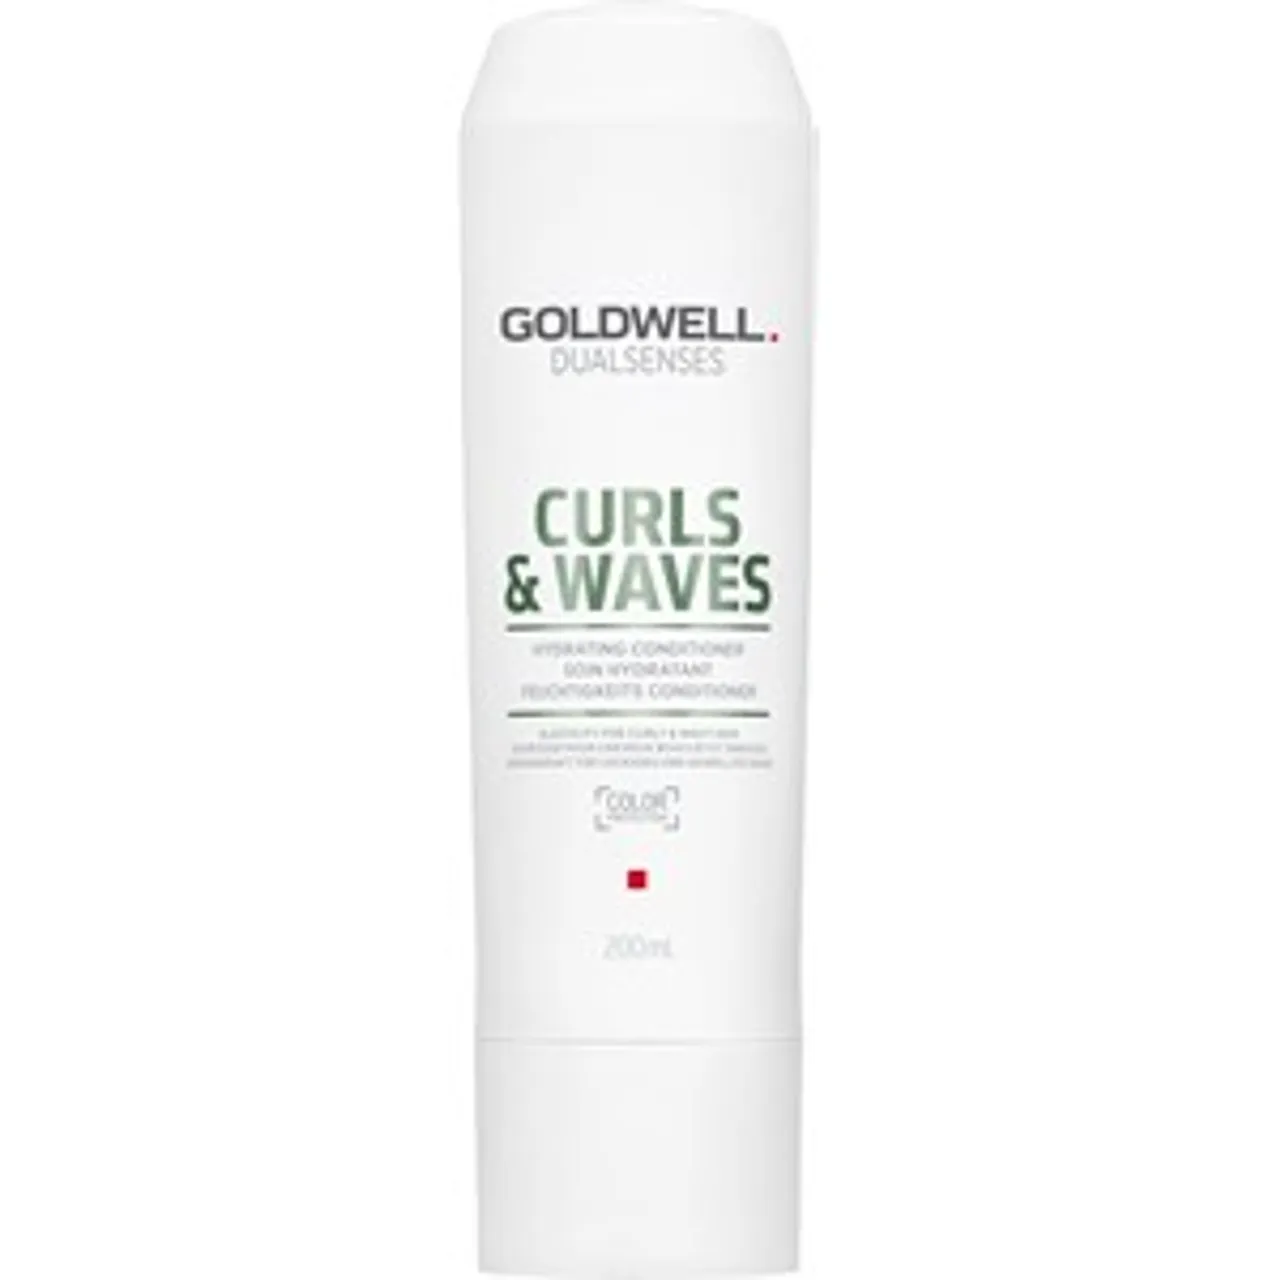 Goldwell Curls & Waves Conditioner Female 200 ml